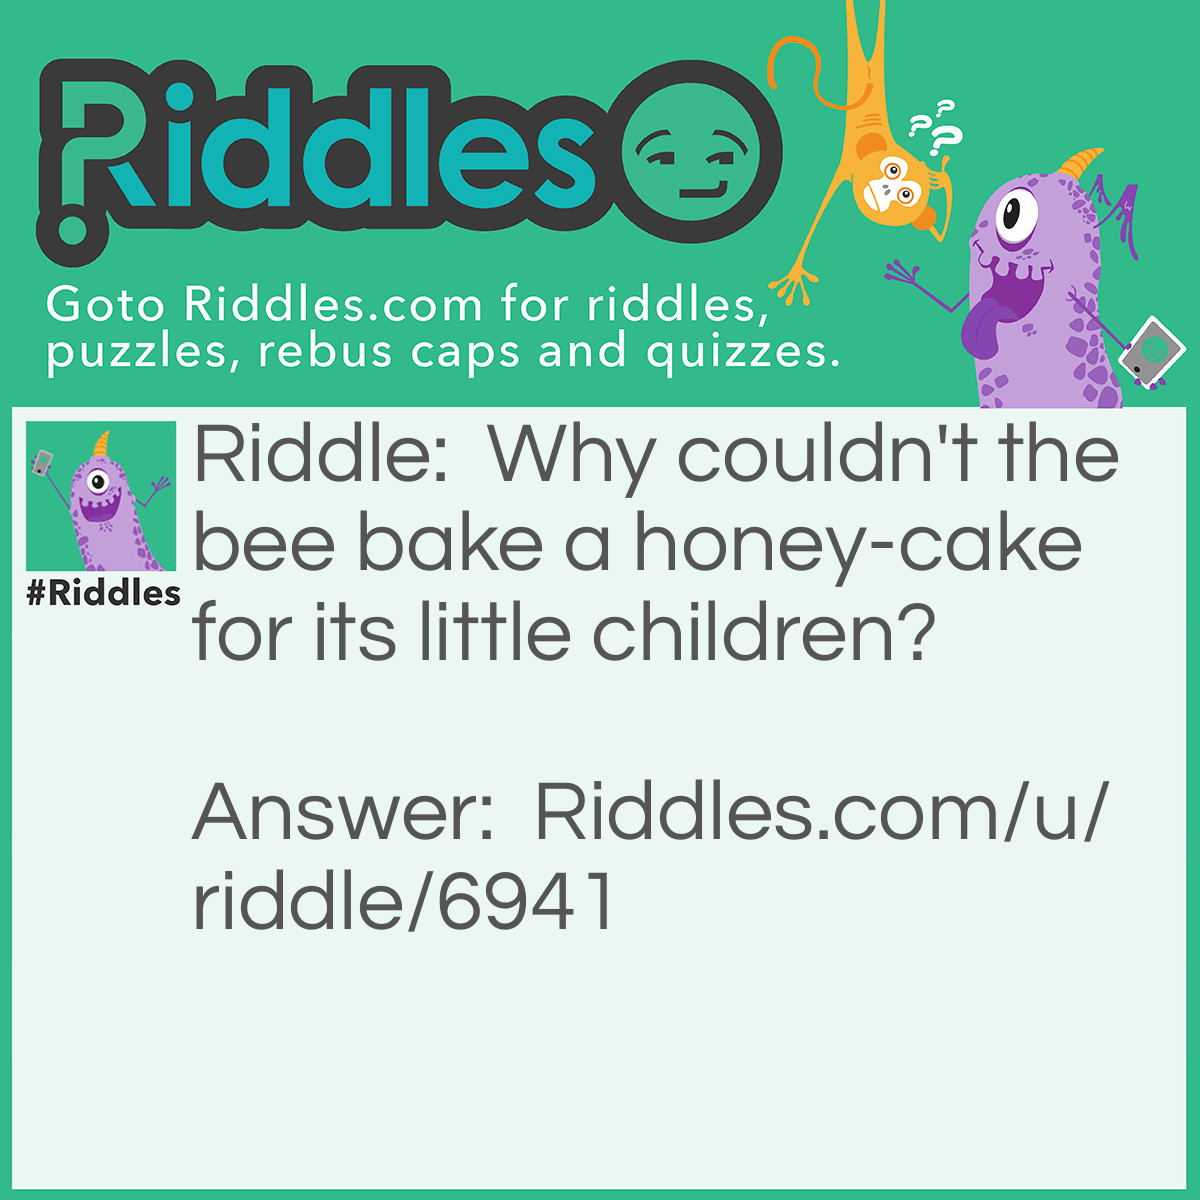 Riddle: Why couldn't the bee bake a honey-cake for its little children? Answer: Because the bee ran out of flower (flour)!